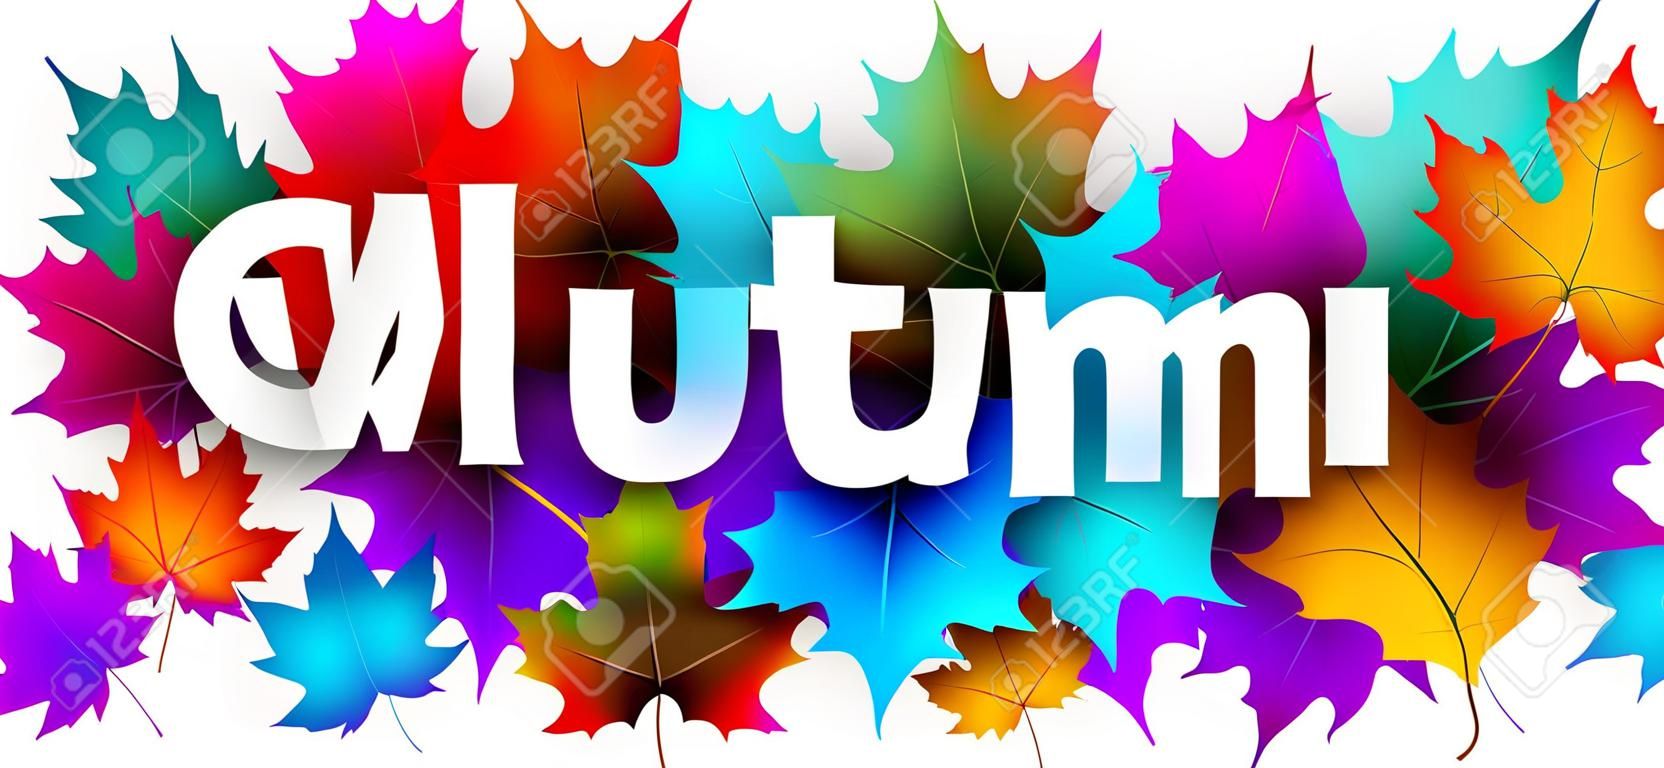 Autumn welcome sign with colorful maple leaves. Vector background.